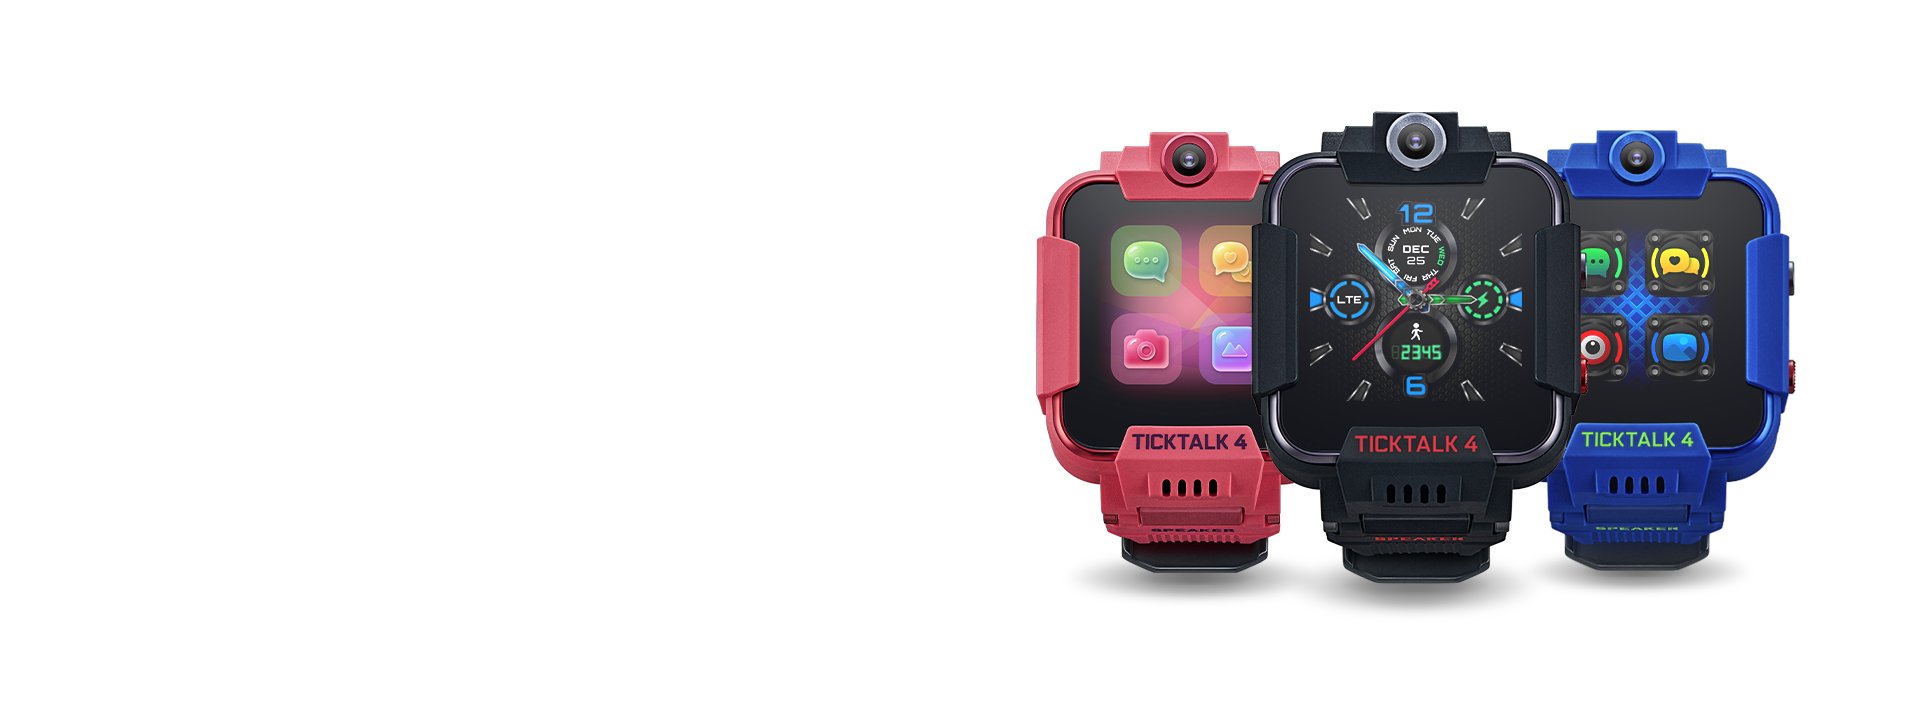 TickTalk 4 Reviews Kid's Smartwatch Phone With GPS Tracking